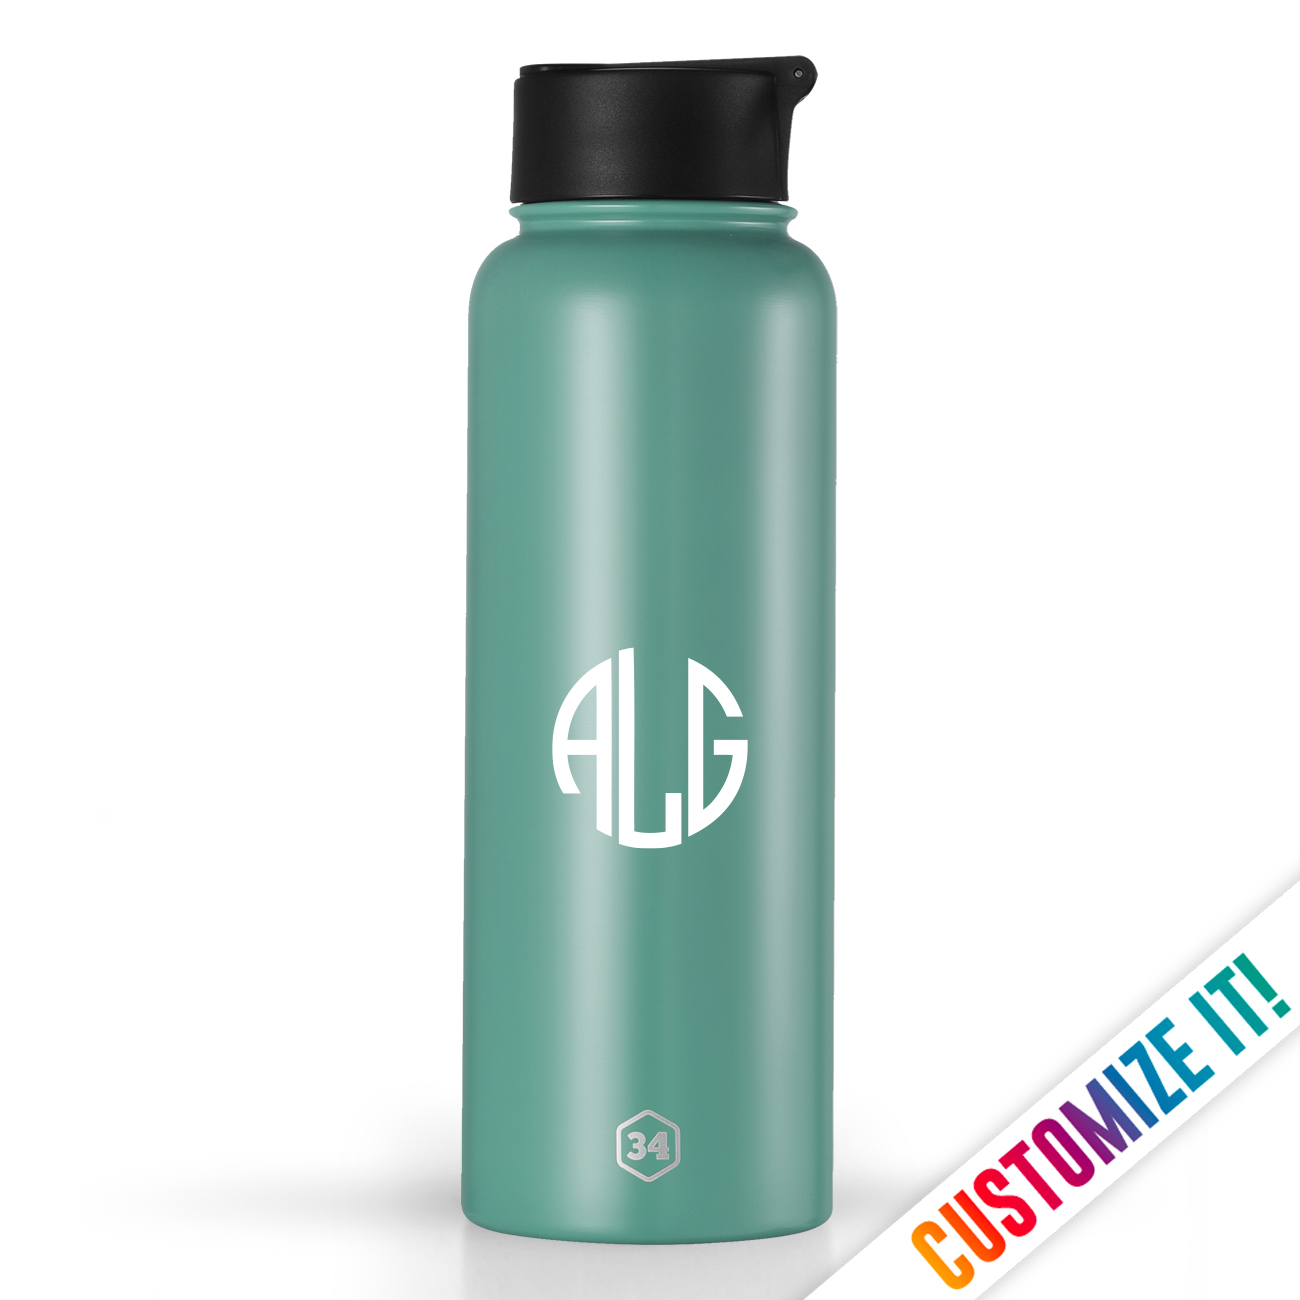 Custom Personalized Insulated Water Bottle Gift - Preppy Monogram